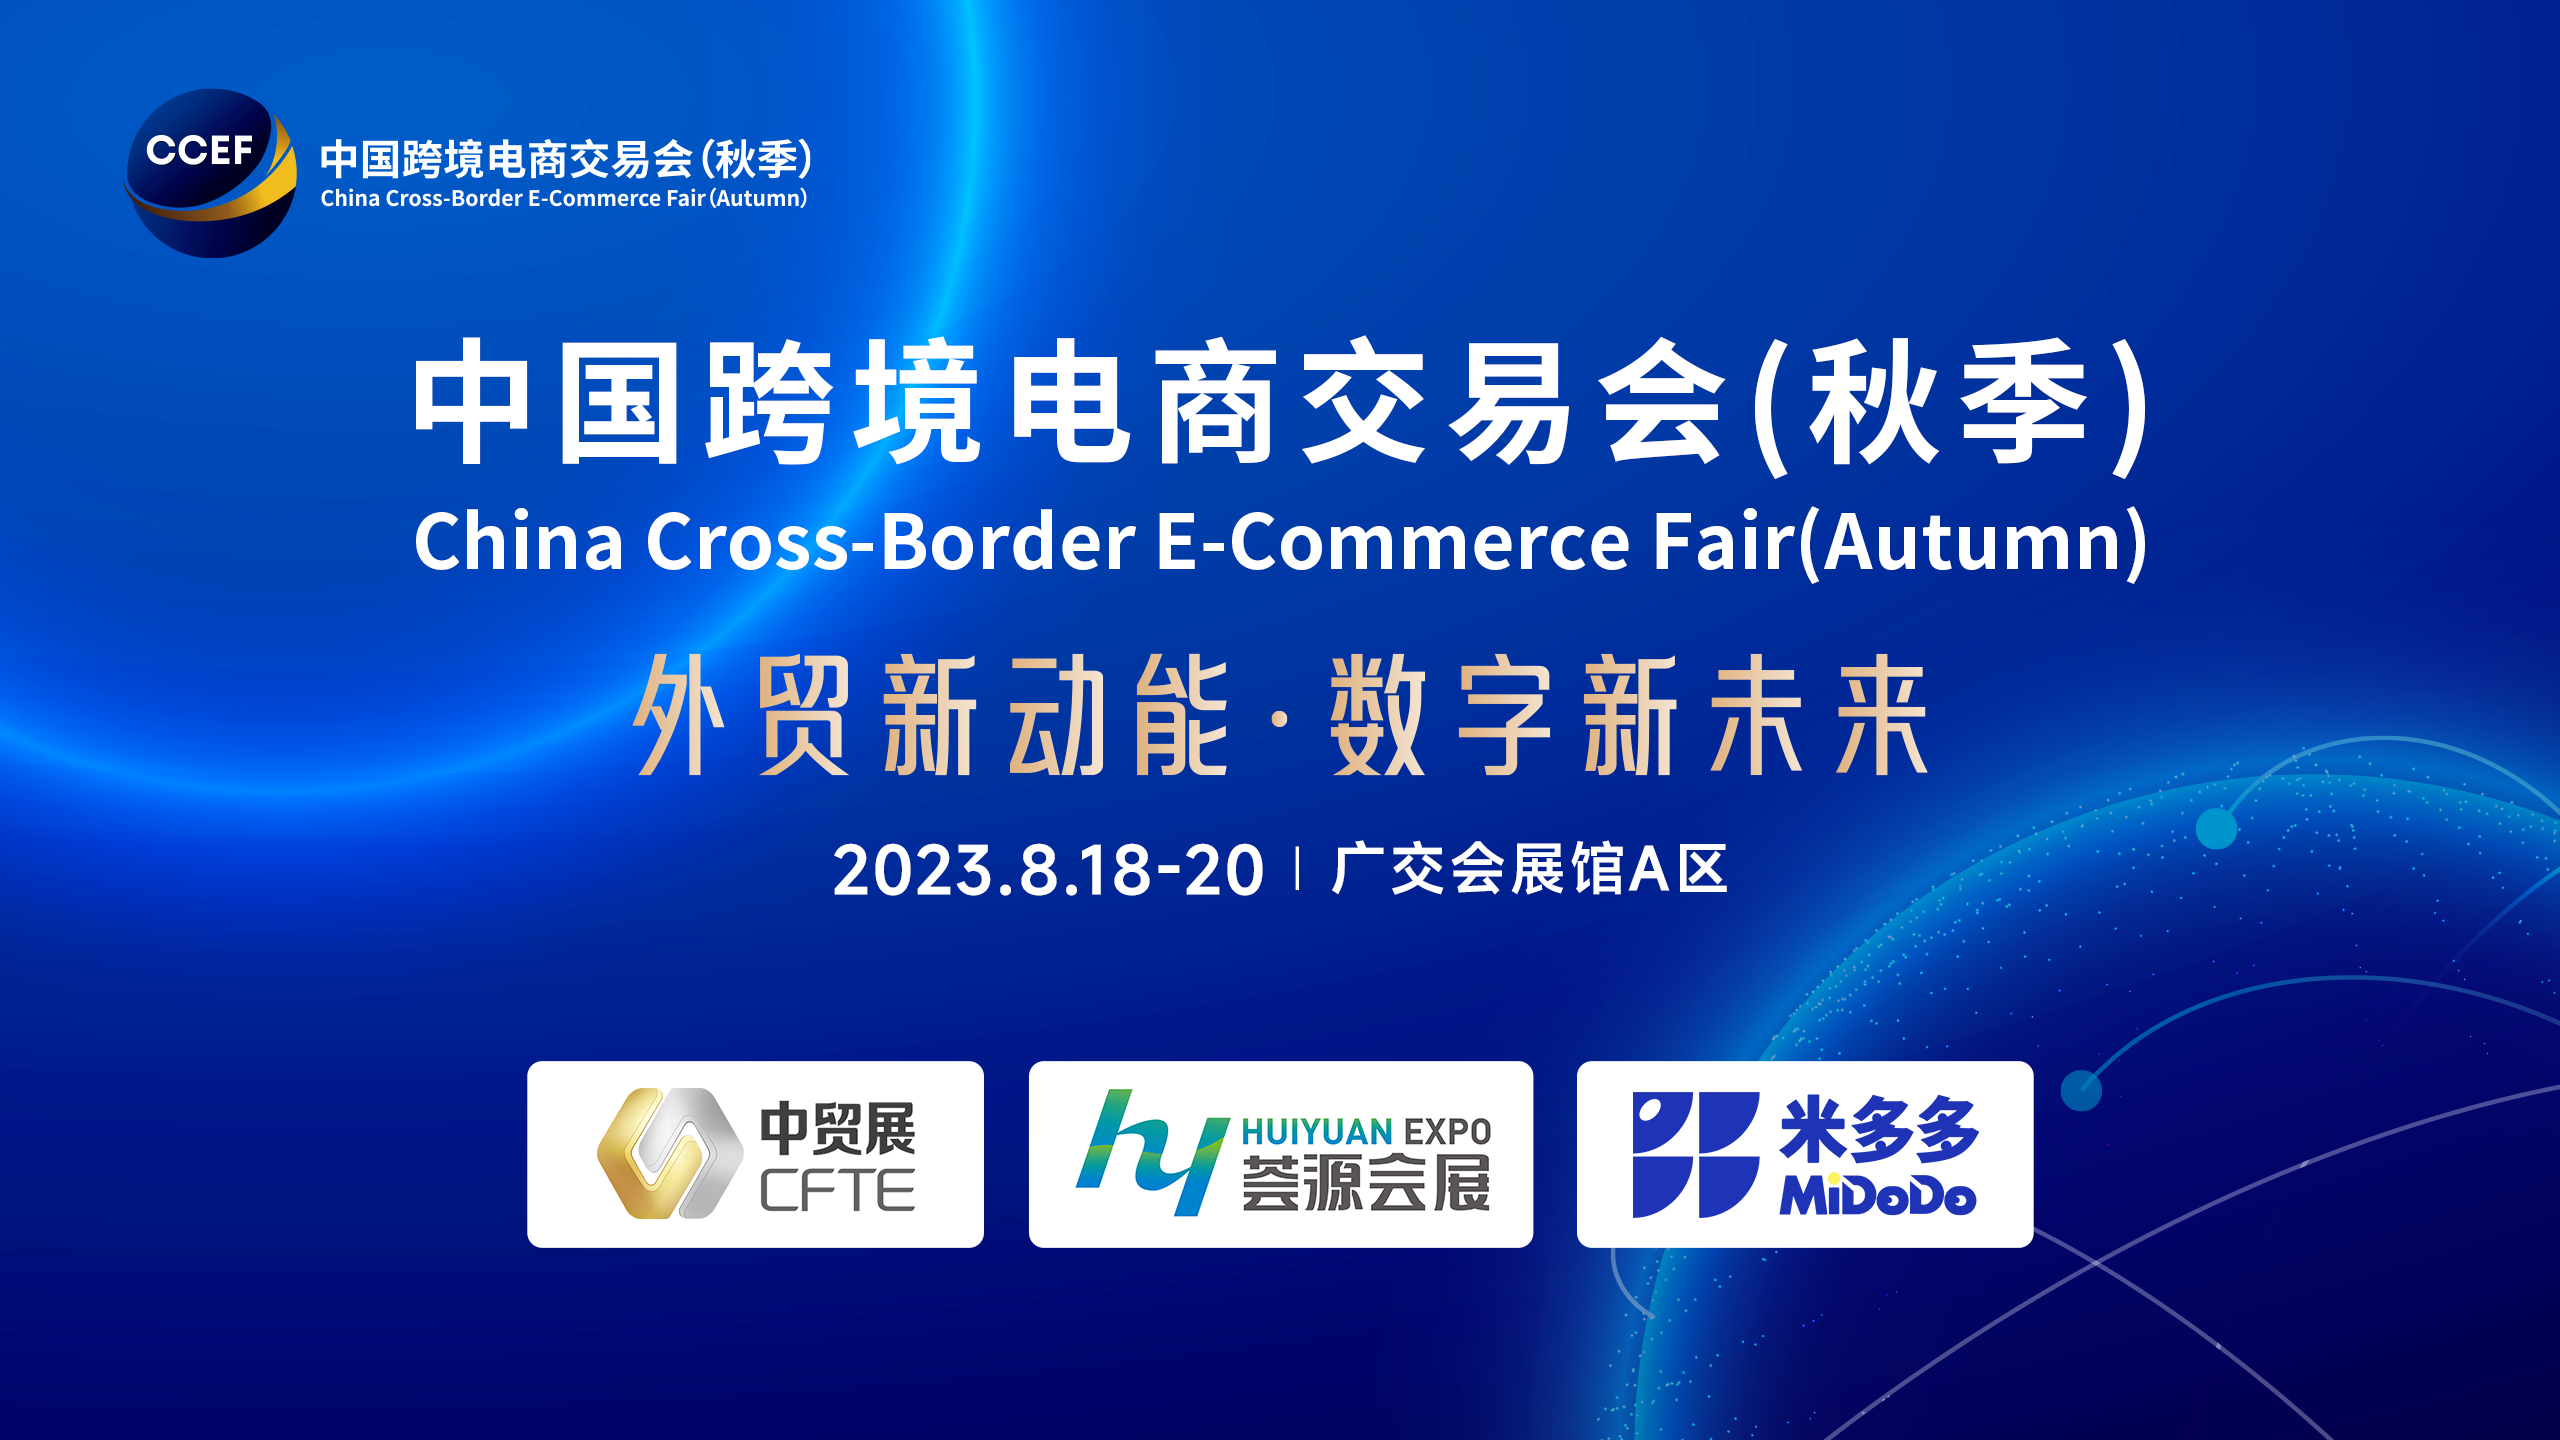 'Scan the QR code to receive' the electronic journal of China International Trade Fair (Autumn) is now online